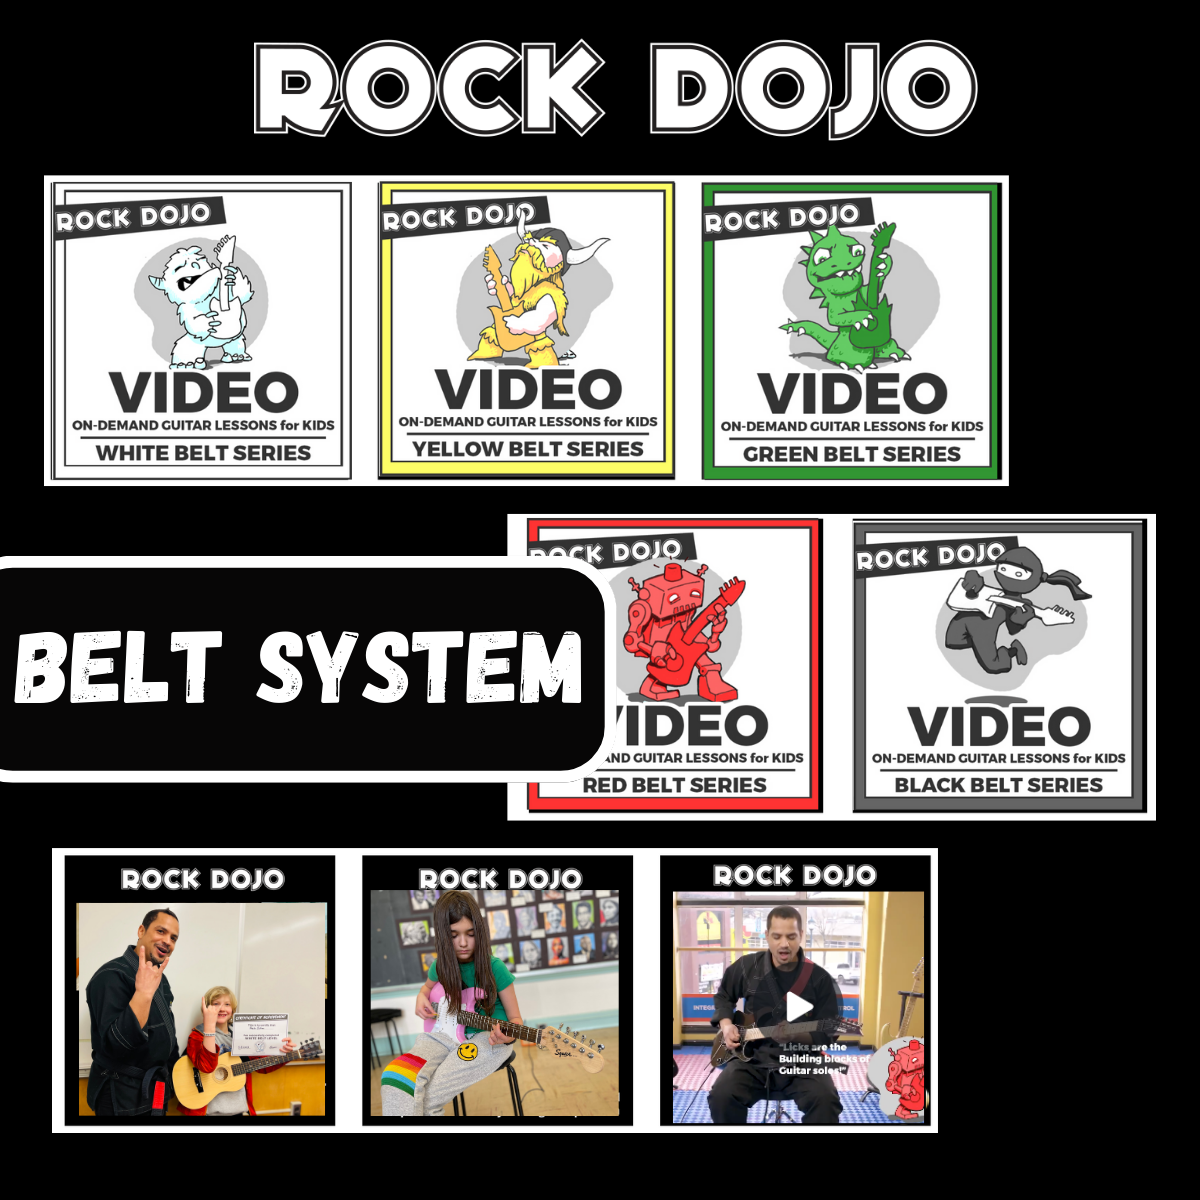 Rock Dojo Belt System is five levels of guitar achievements represented by the White, Yellow, Green, Red, and Black Levels.